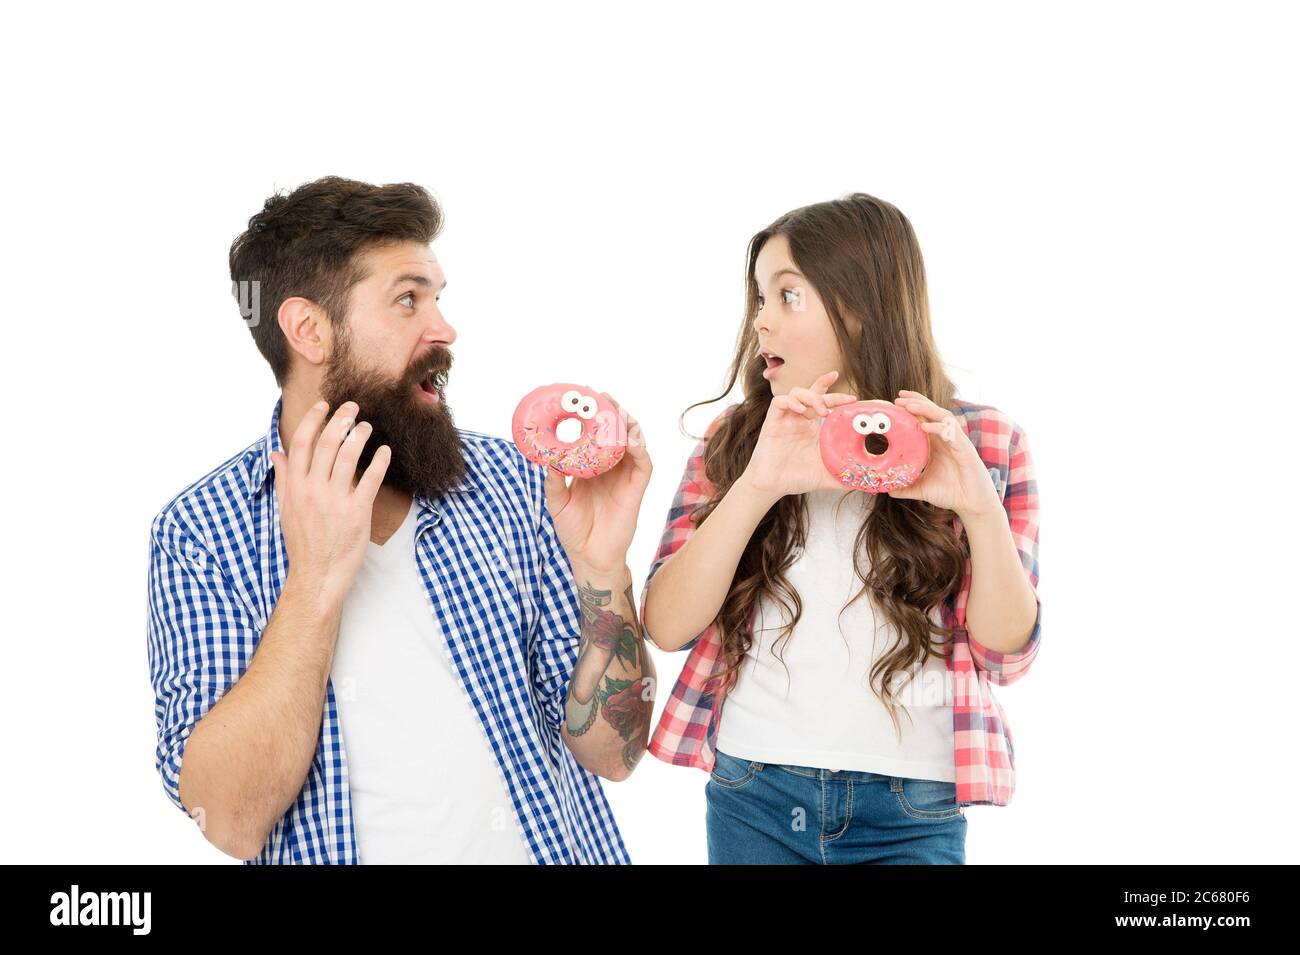 Sweets and treats concept. Daughter and father eat sweet donuts. Bakery shop. Fathers day. Sweet tooth. Girl child and dad hold glazed donuts. Cheerful family. Happiness and joy. Hungry kid. Stock Photo